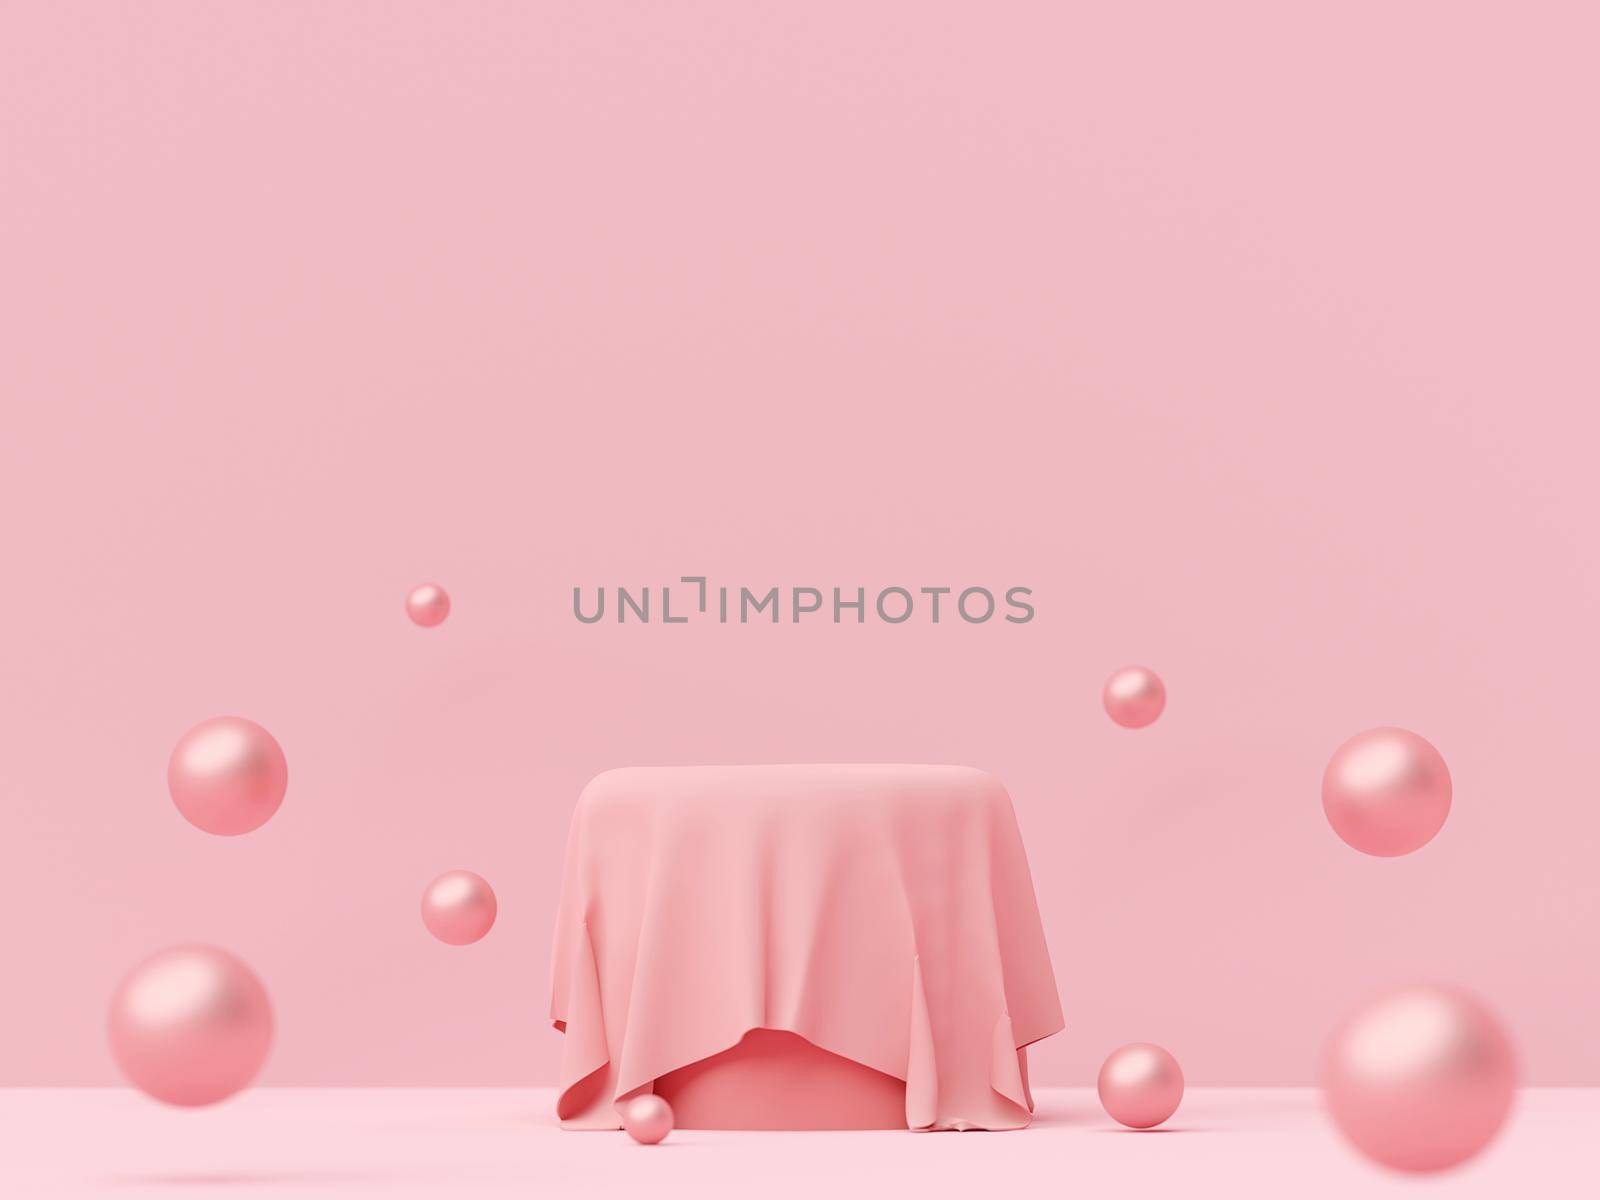 Scene of pastel color with geometric shape podium on pink background, 3d rendering by nutzchotwarut